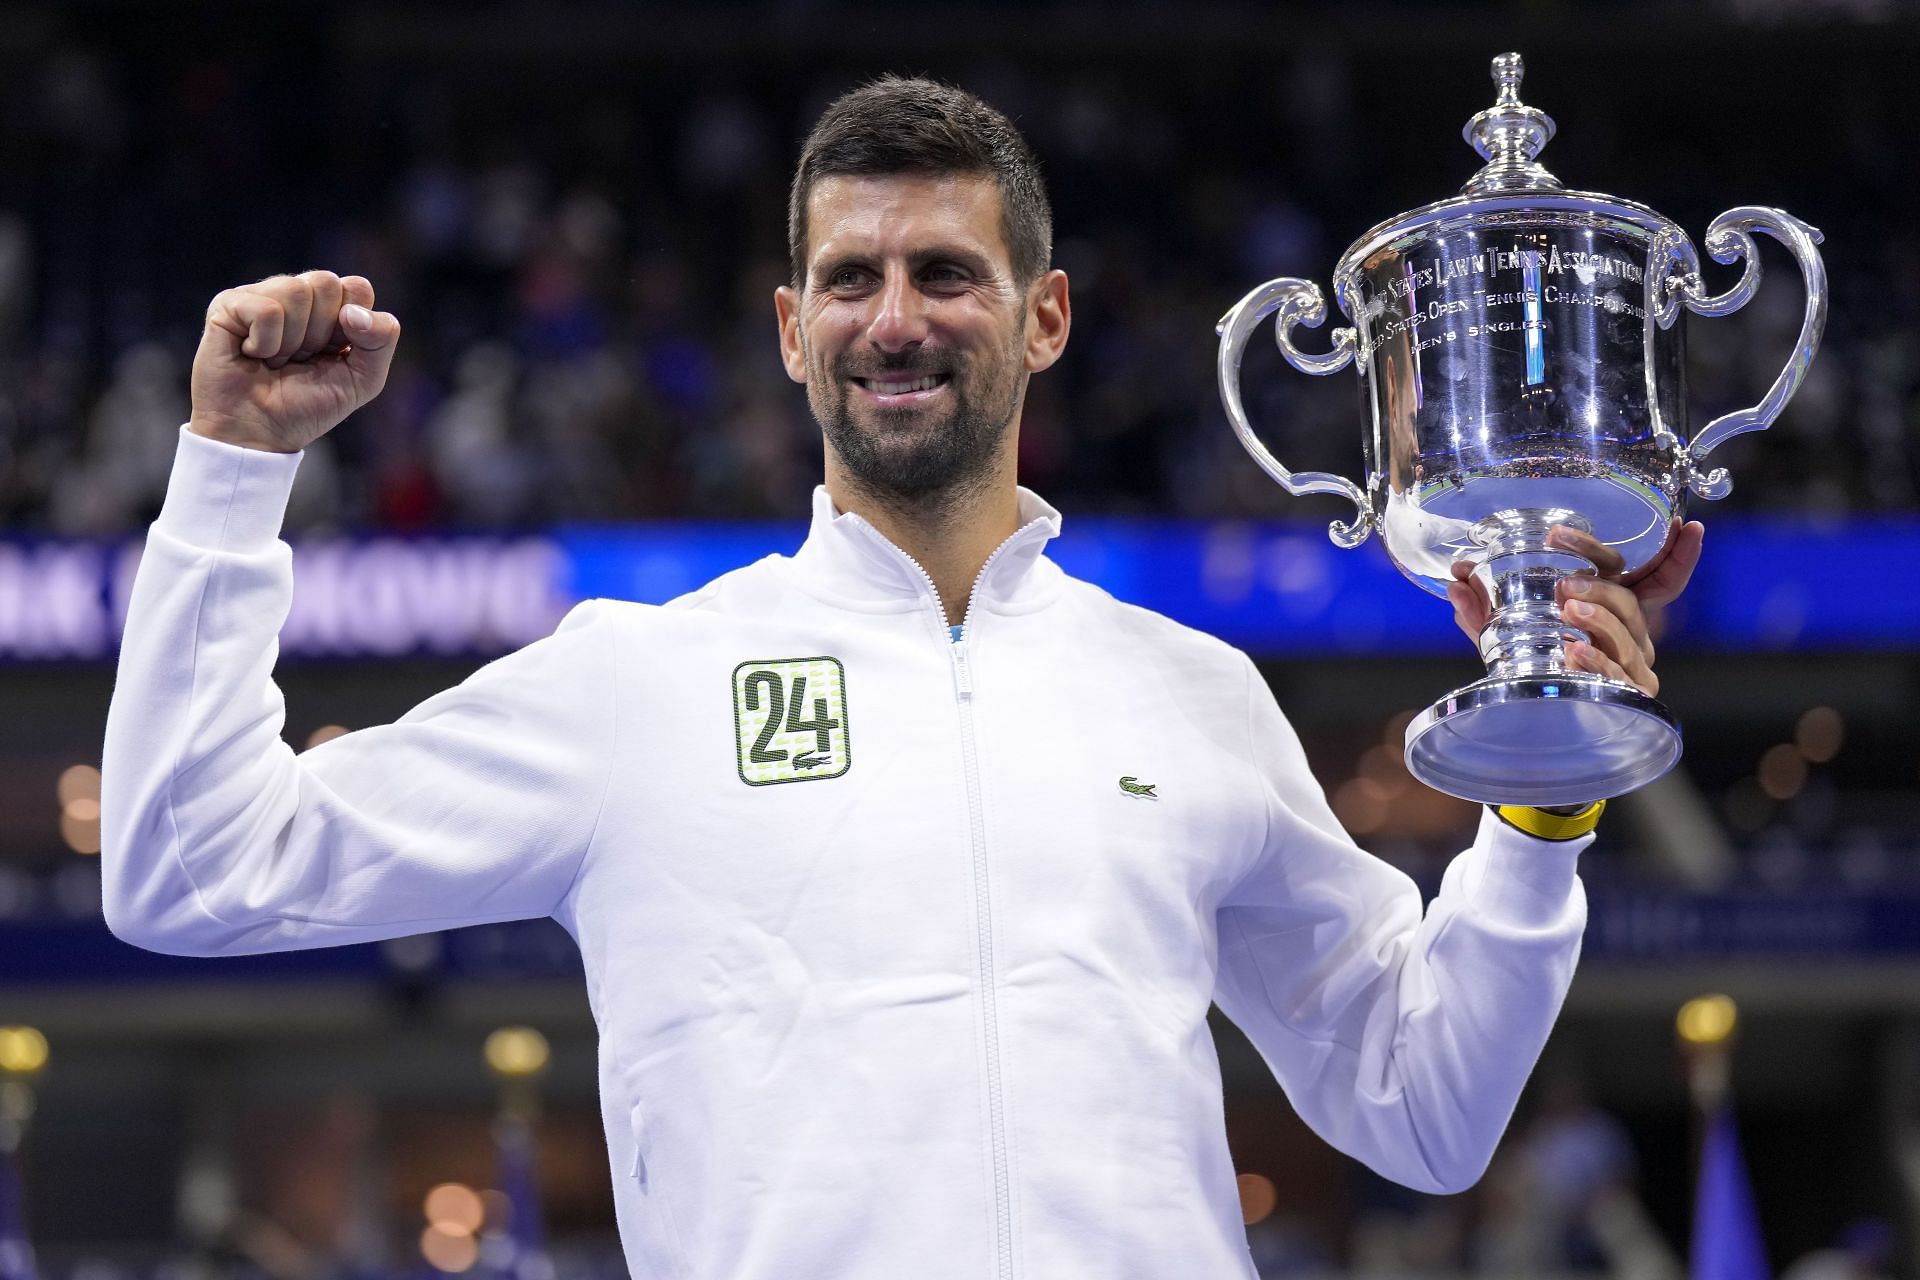 The Serb wins the 2023 US Open title